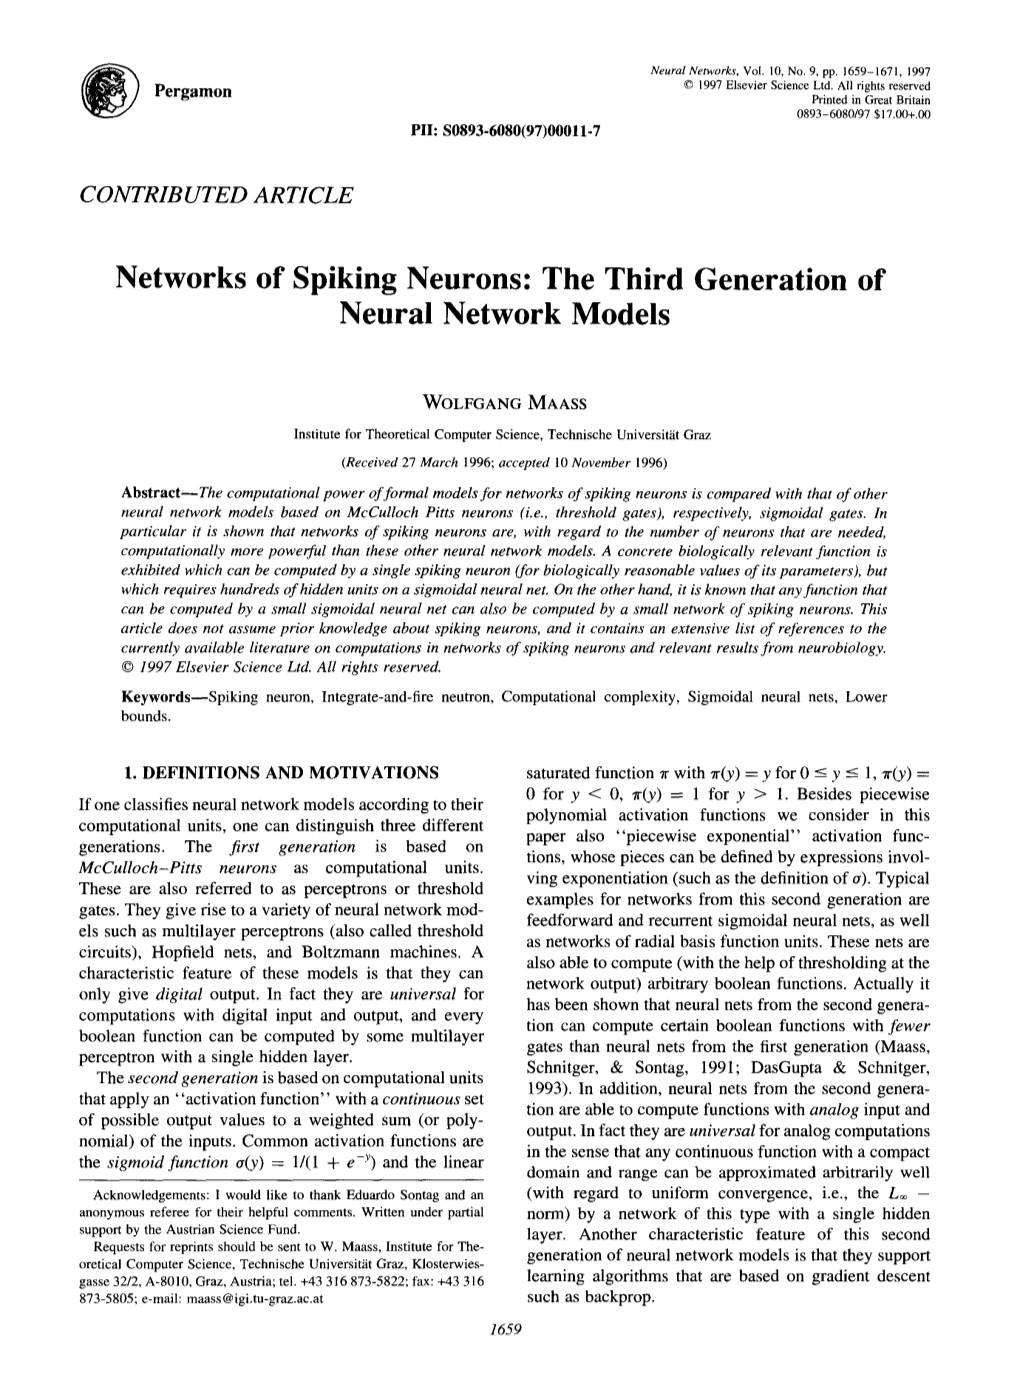 Networks of Spiking Neurons: the Third Generation of Neural Network Models